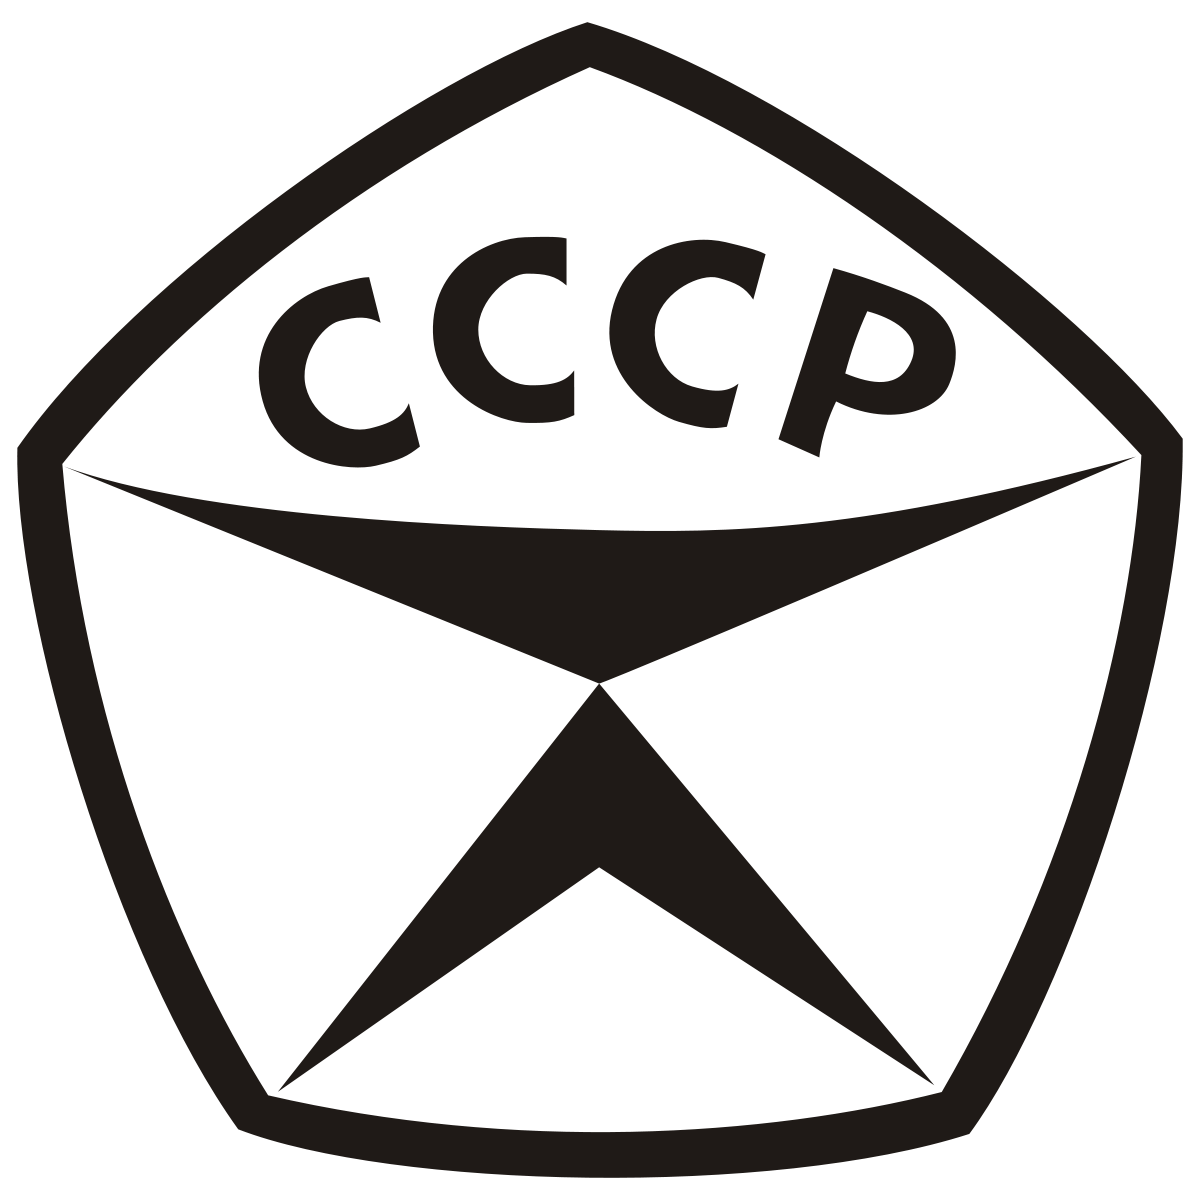 CCCP Logo - State quality mark of the USSR